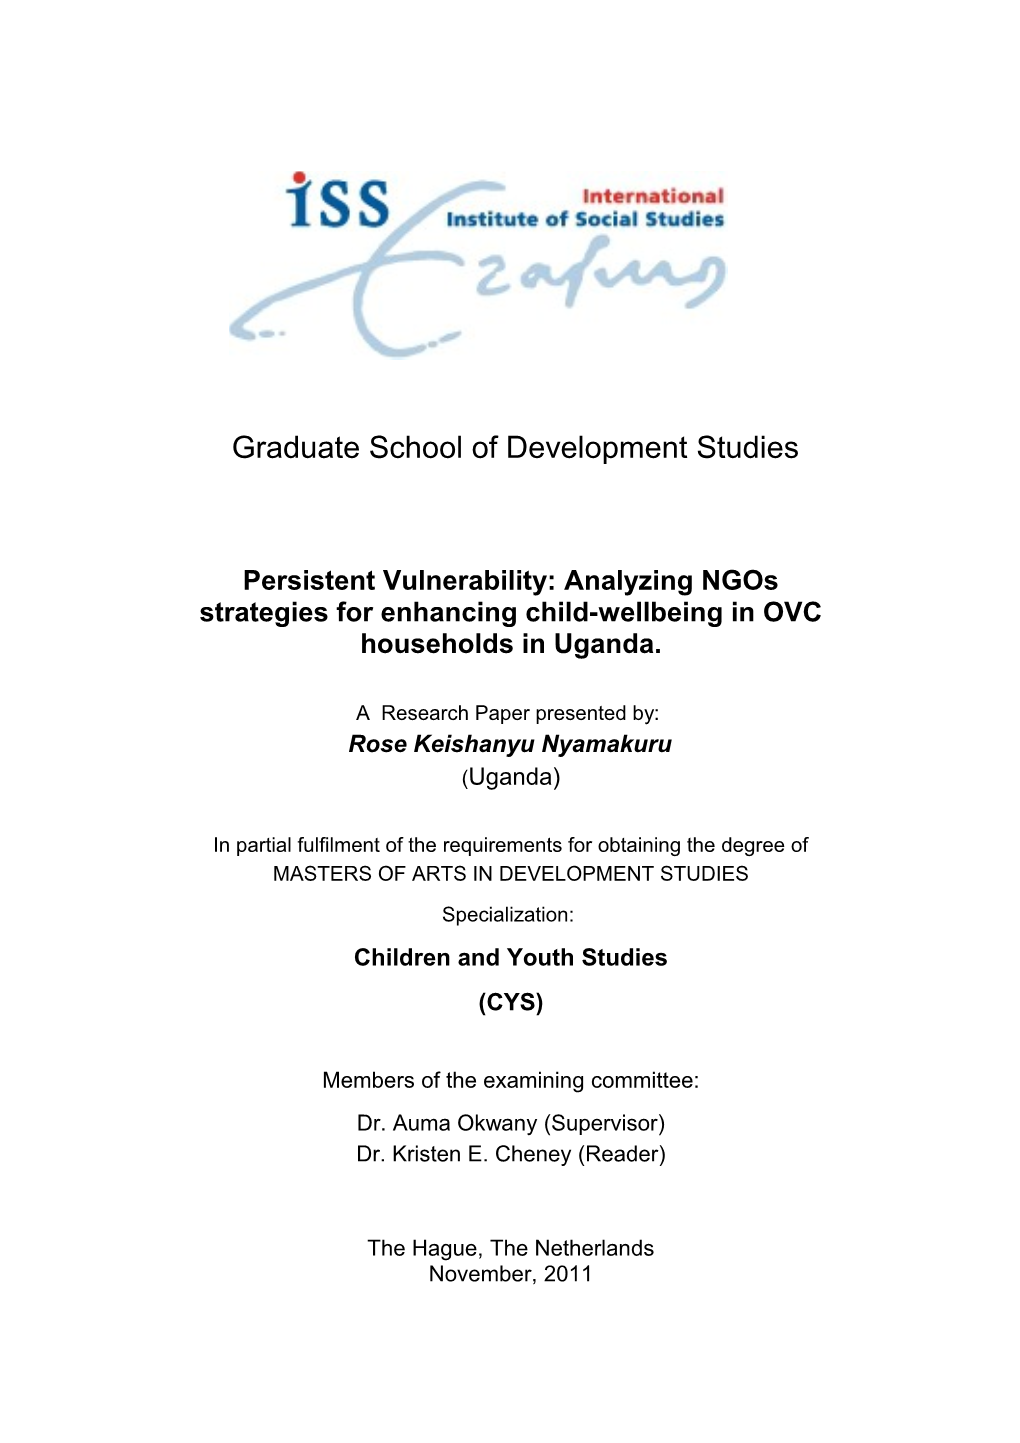 Persistent Vulnerability: Analyzing Ngos Strategies for Enhancing Child-Wellbeing in OVC